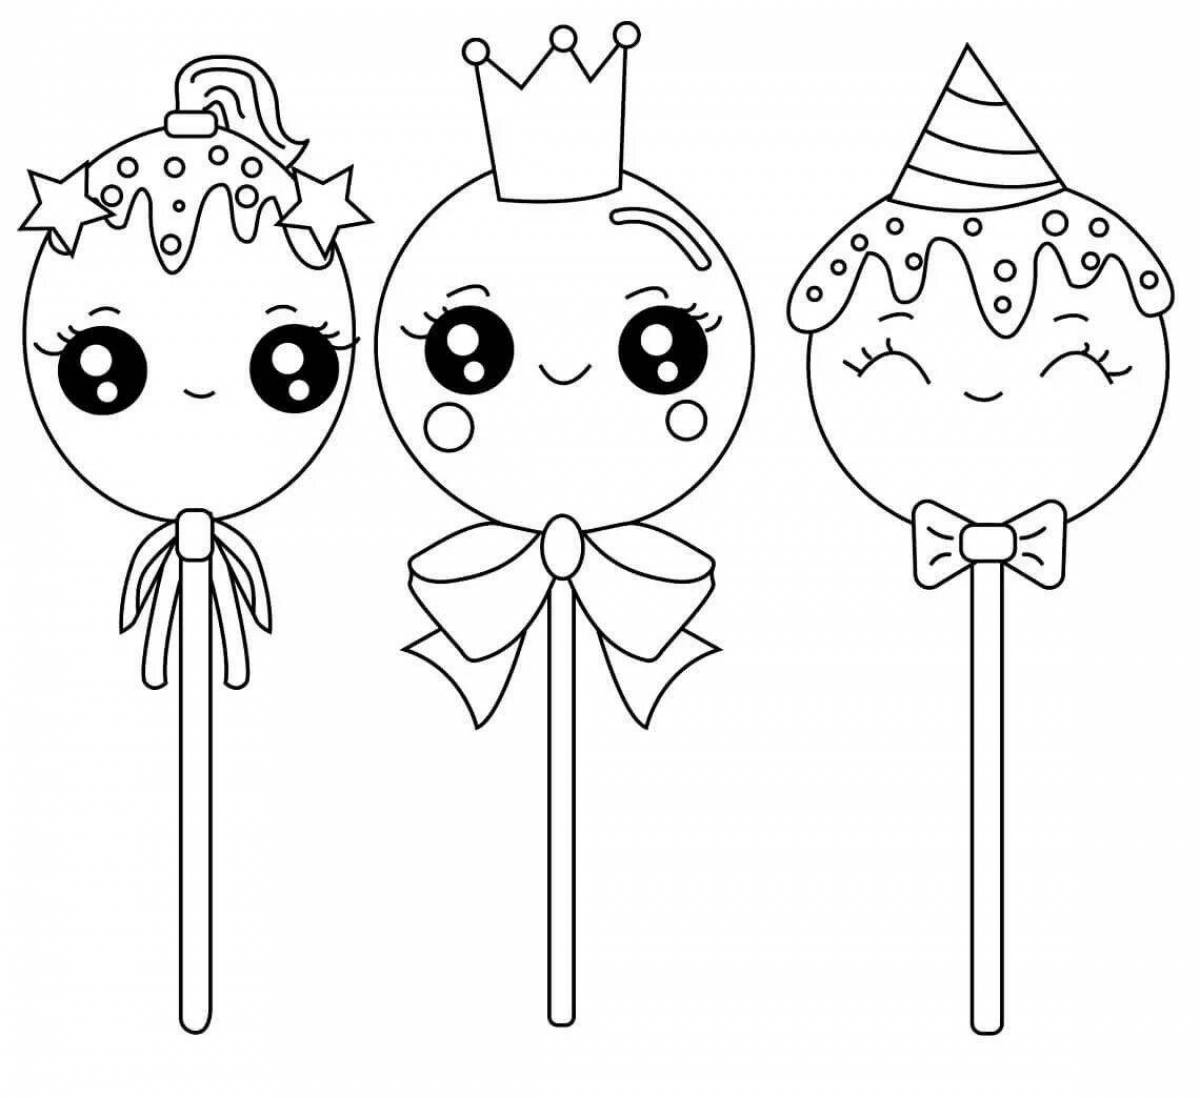 Color explosion cake pops coloring book